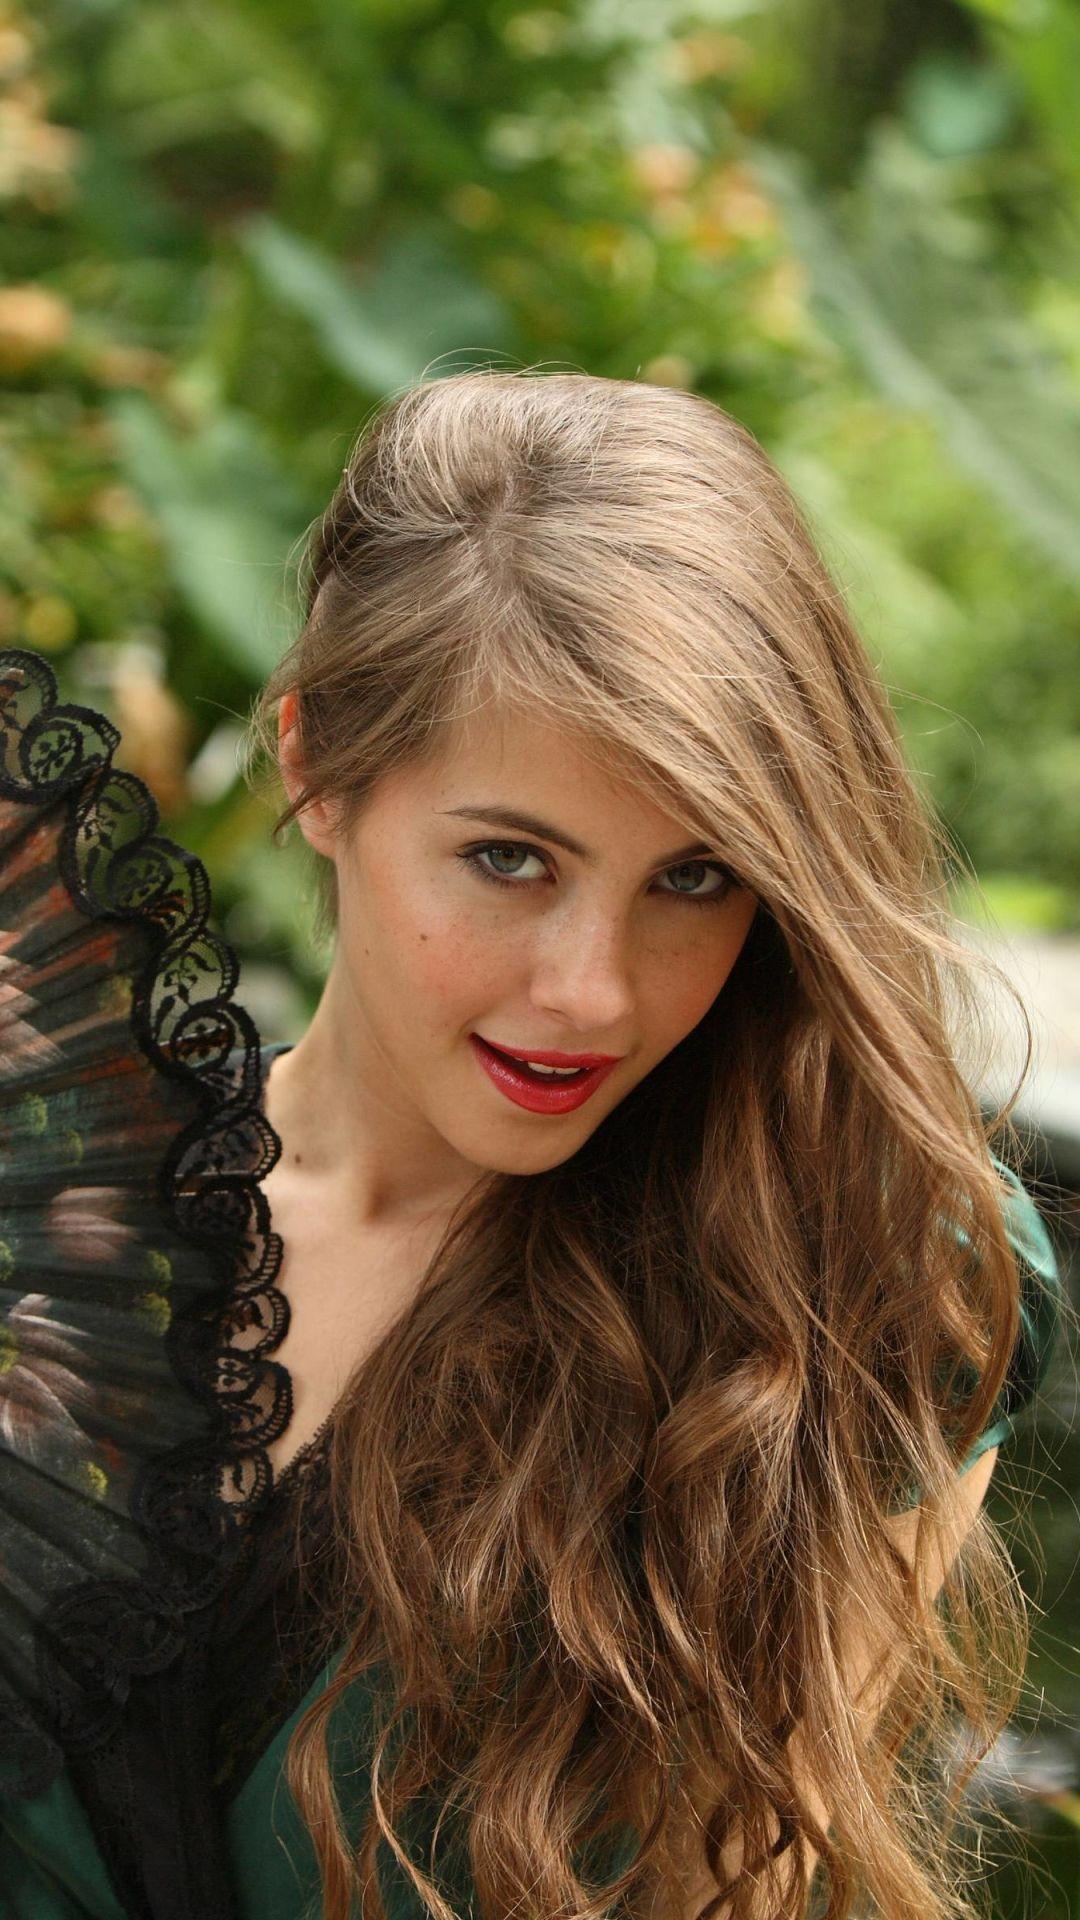 Willa Holland in Black Photoshoot Wallpapers